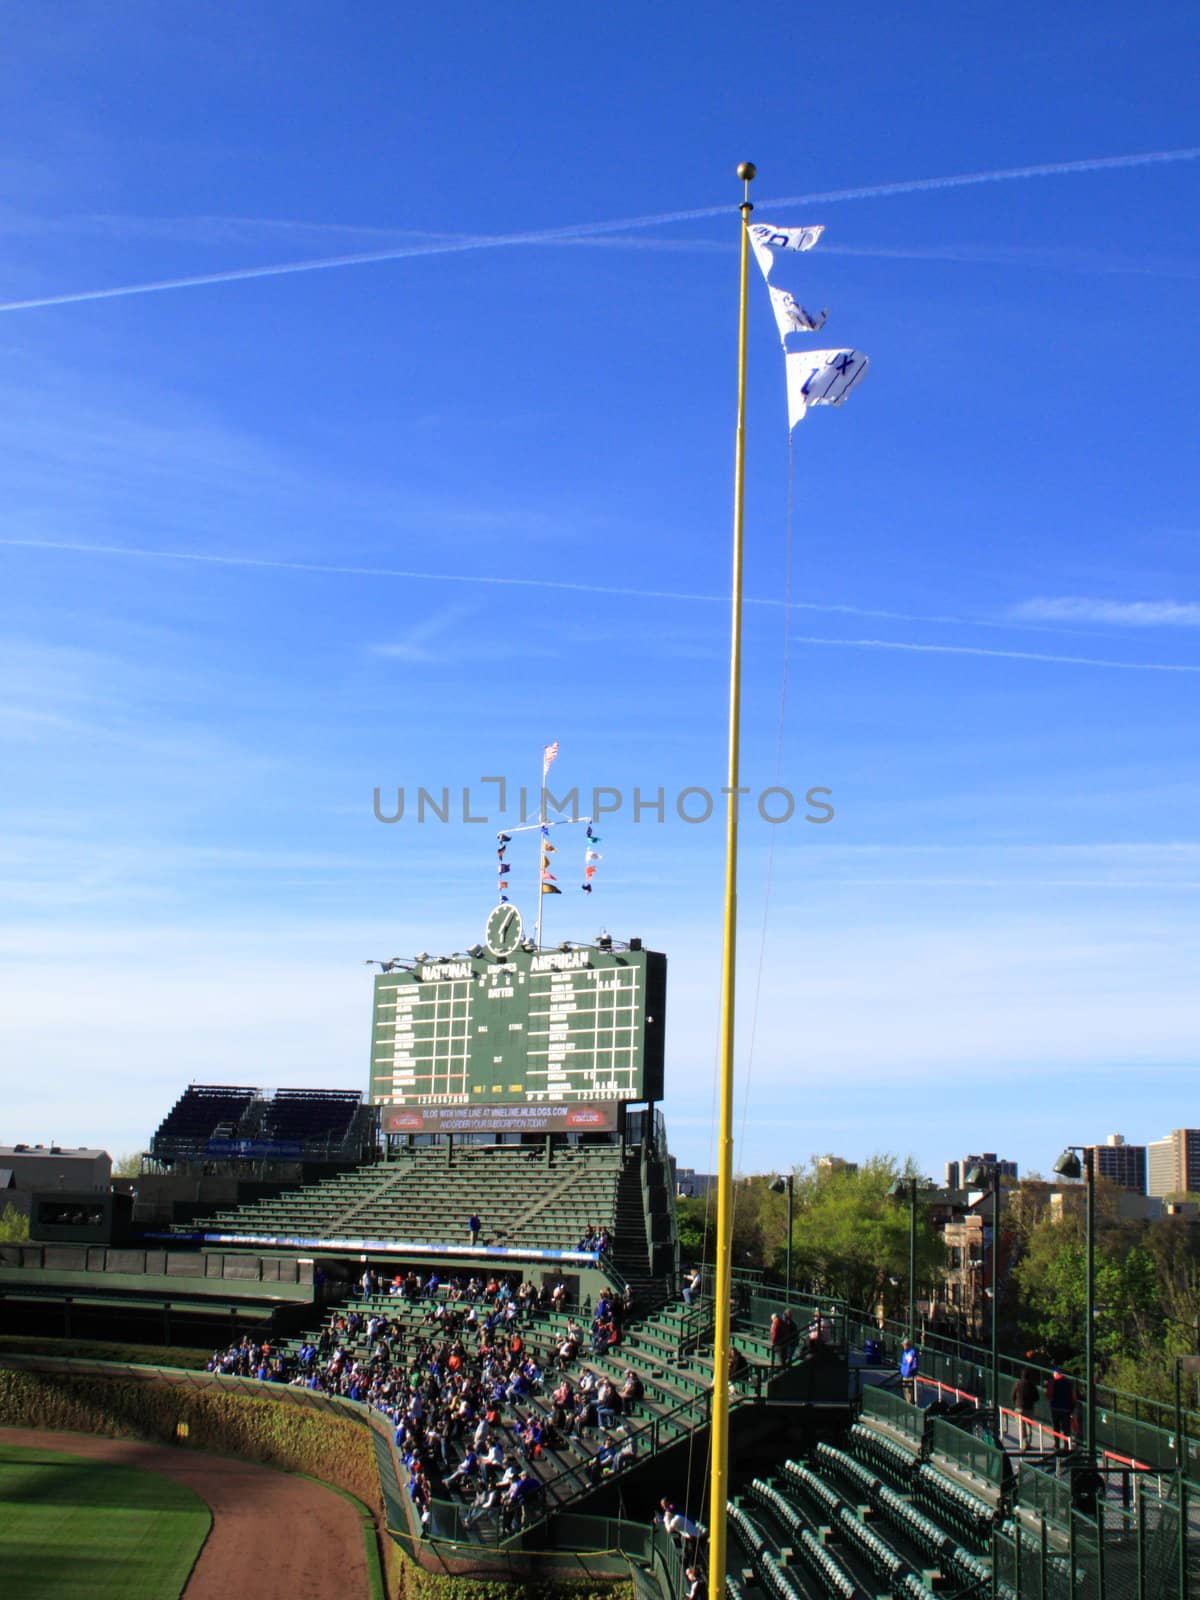 Wrigley Field - Chicago Cubs by Ffooter